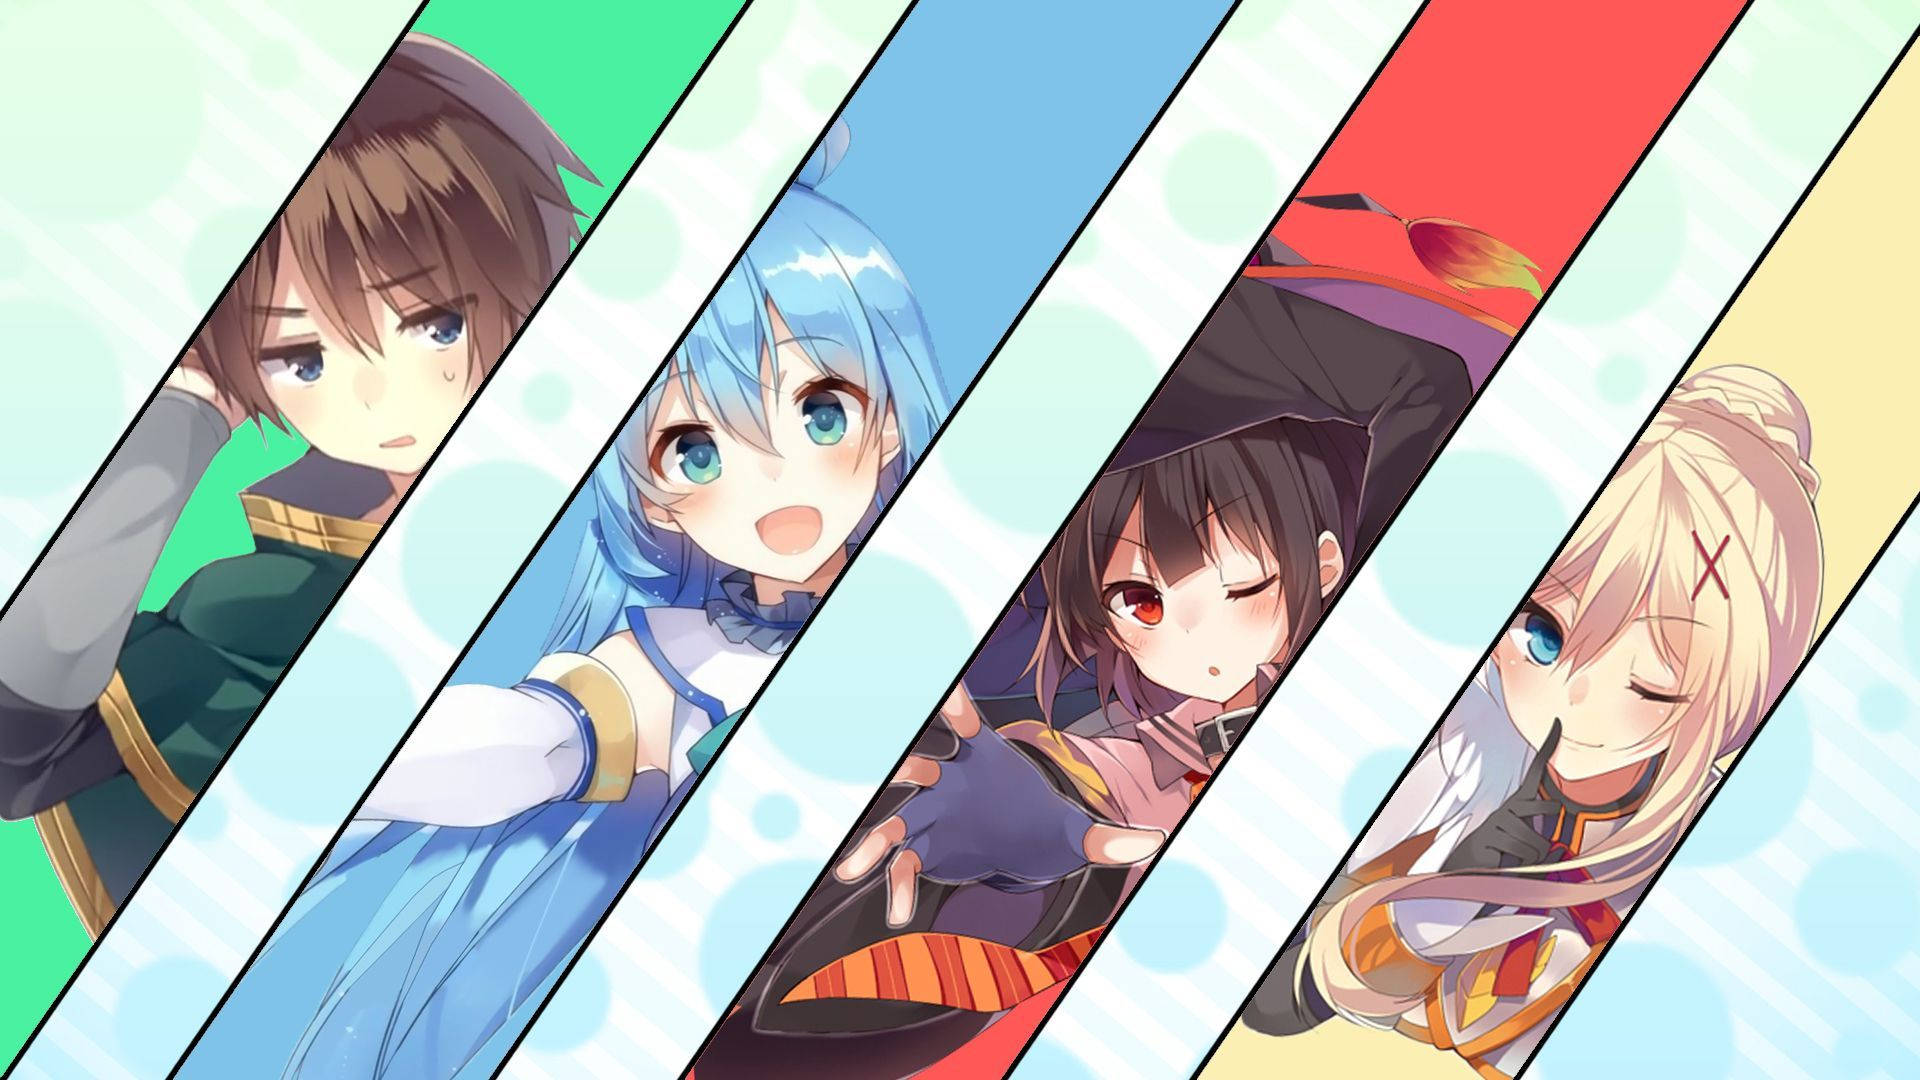 An illustration of the eccentric characters from the anime Konosuba Wallpaper